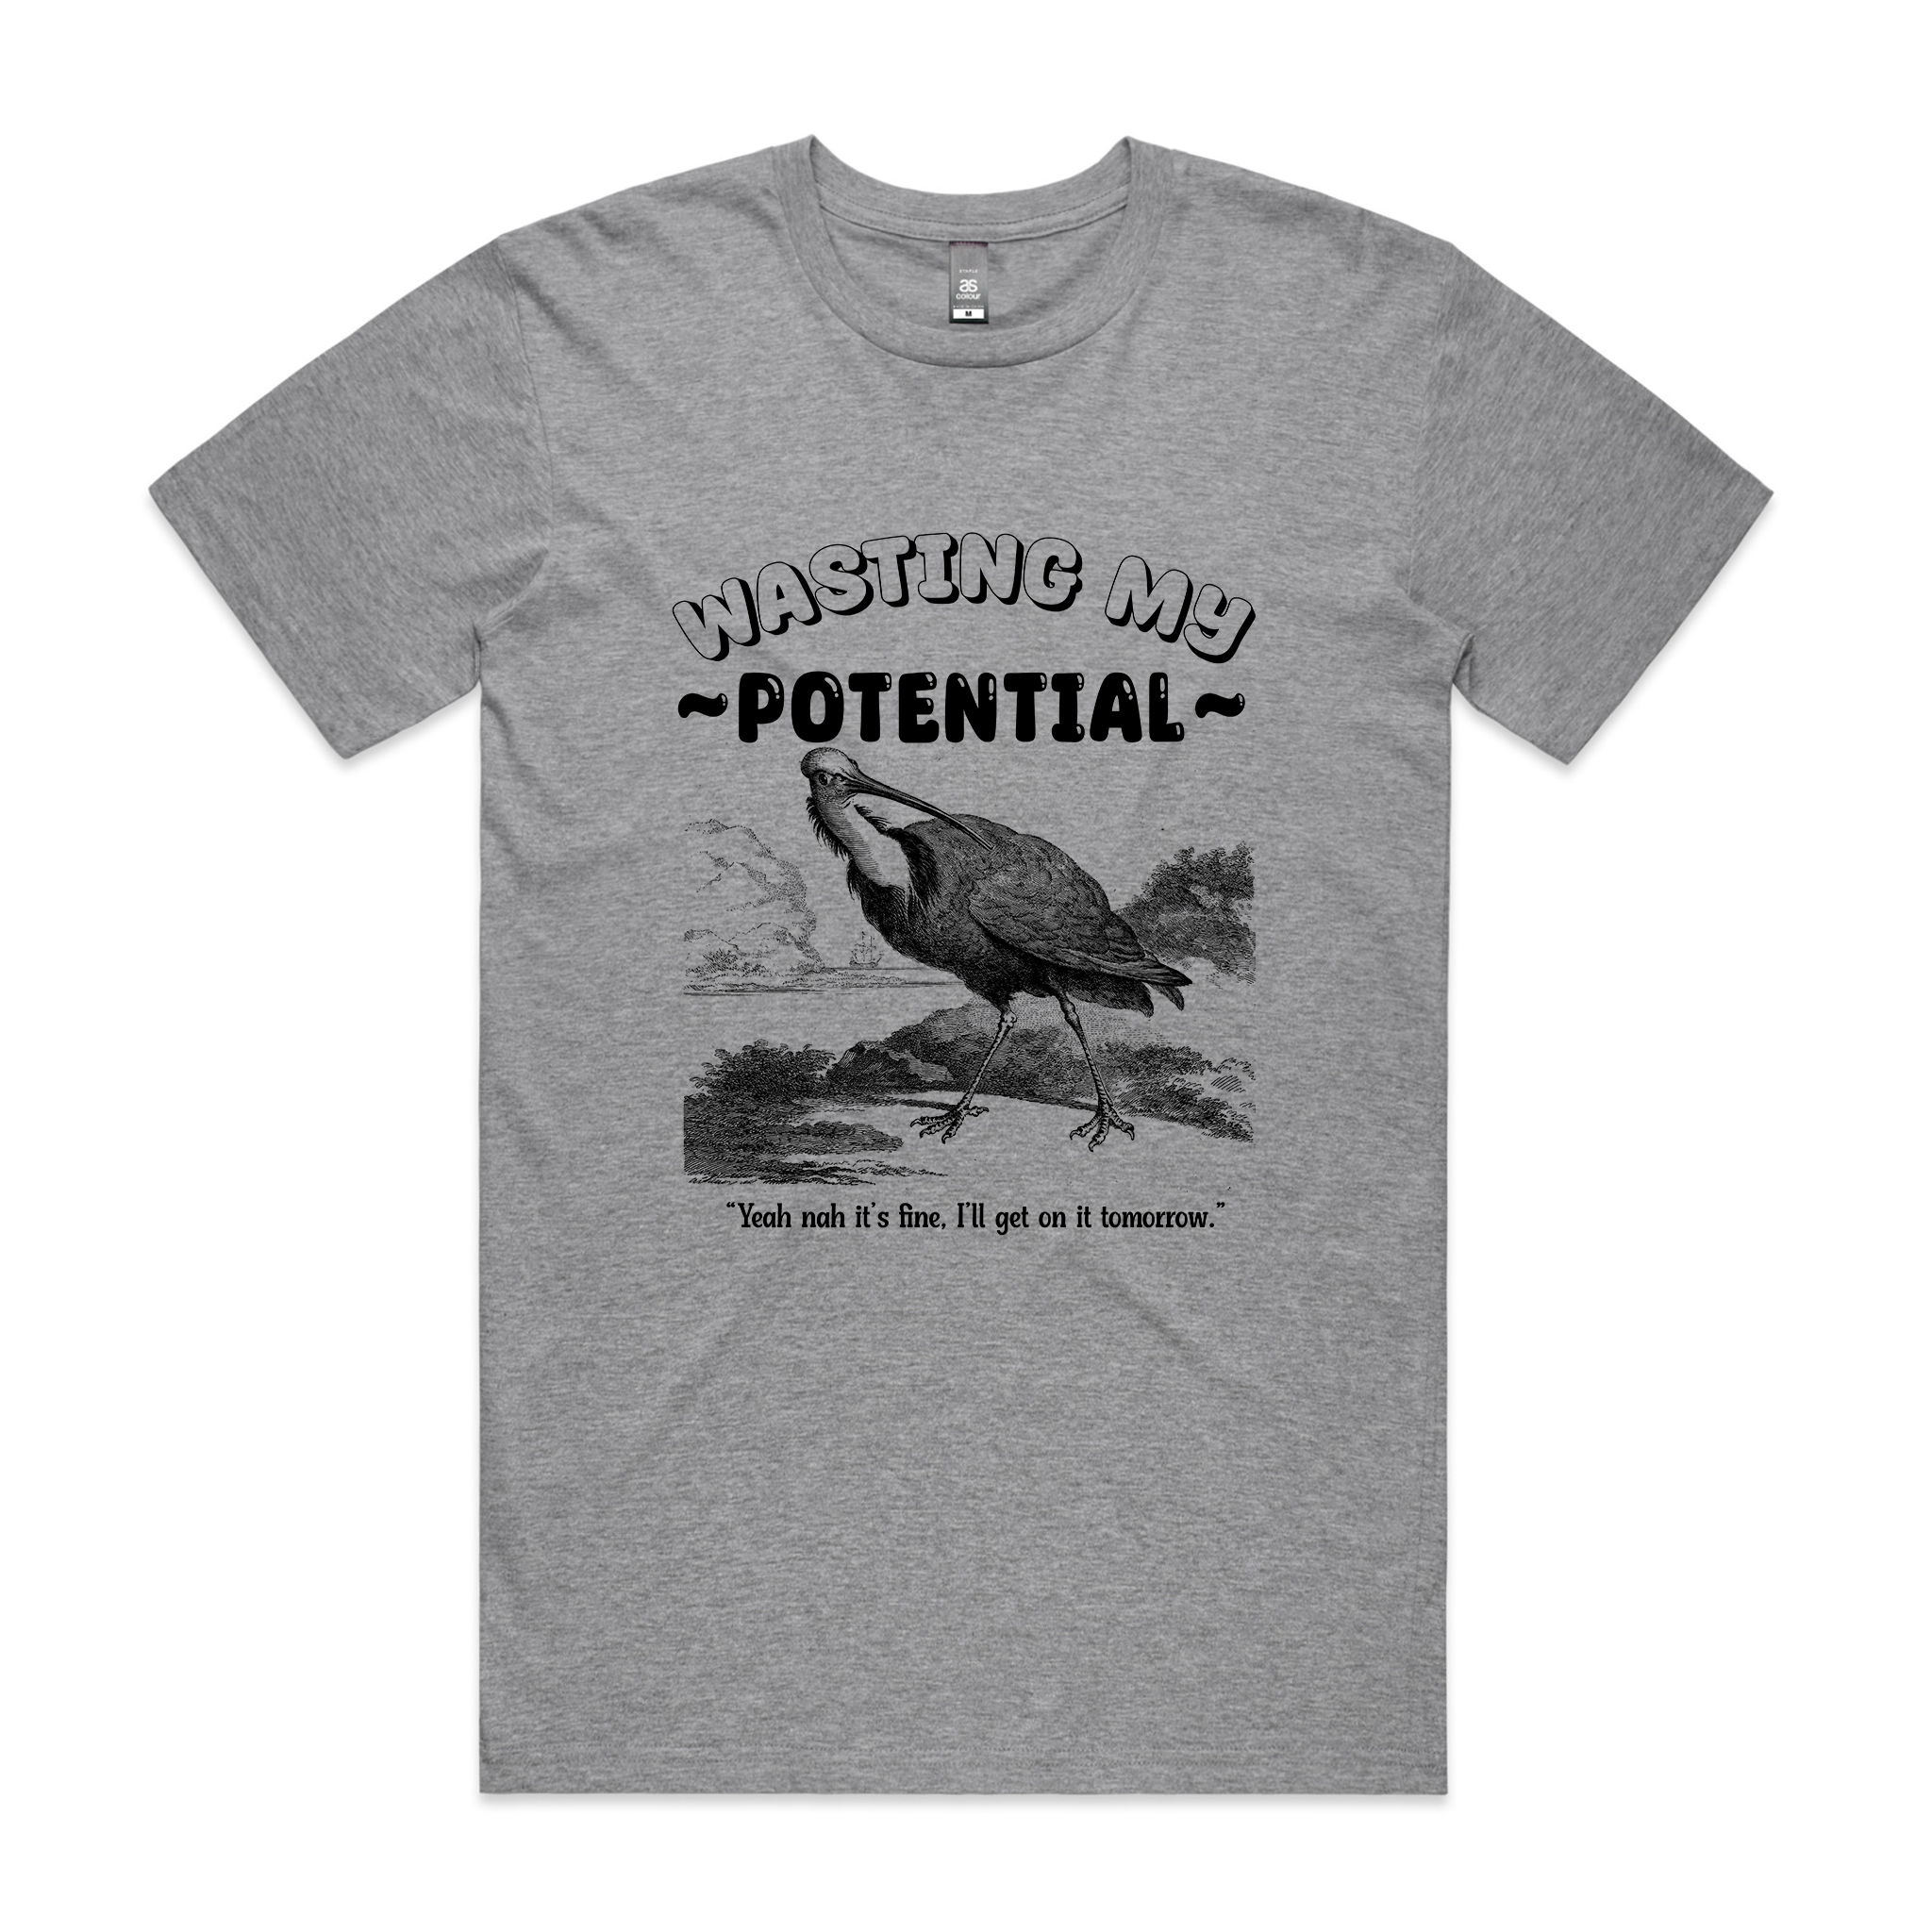 Wasting My Potential Tee